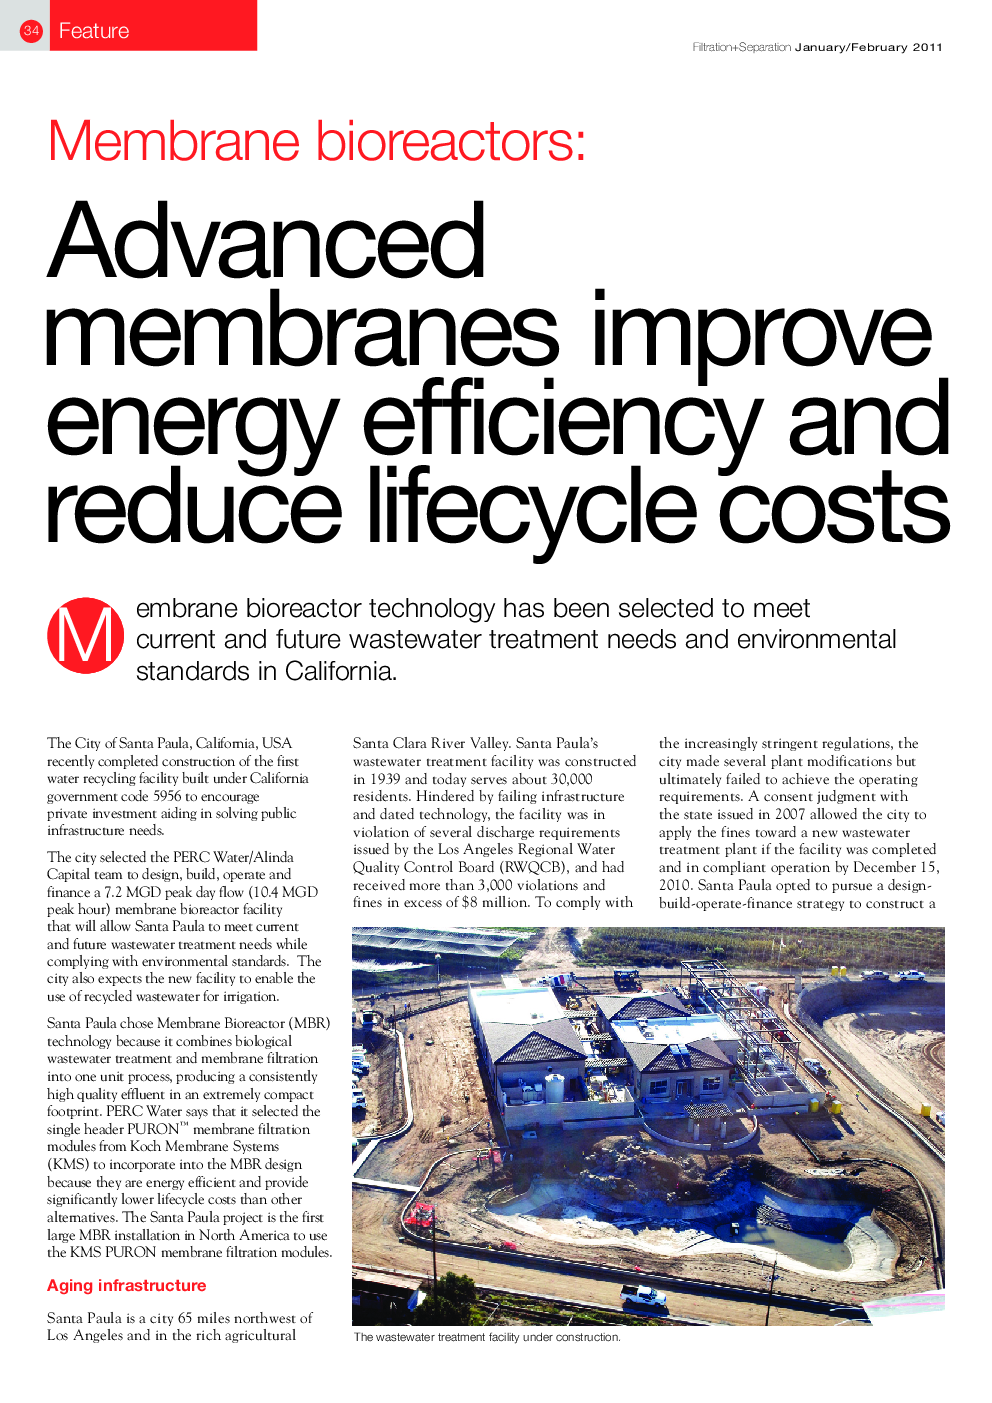 Membrane bioreactors: Advanced membranes improve energy efficiency and reduce lifecycle costs